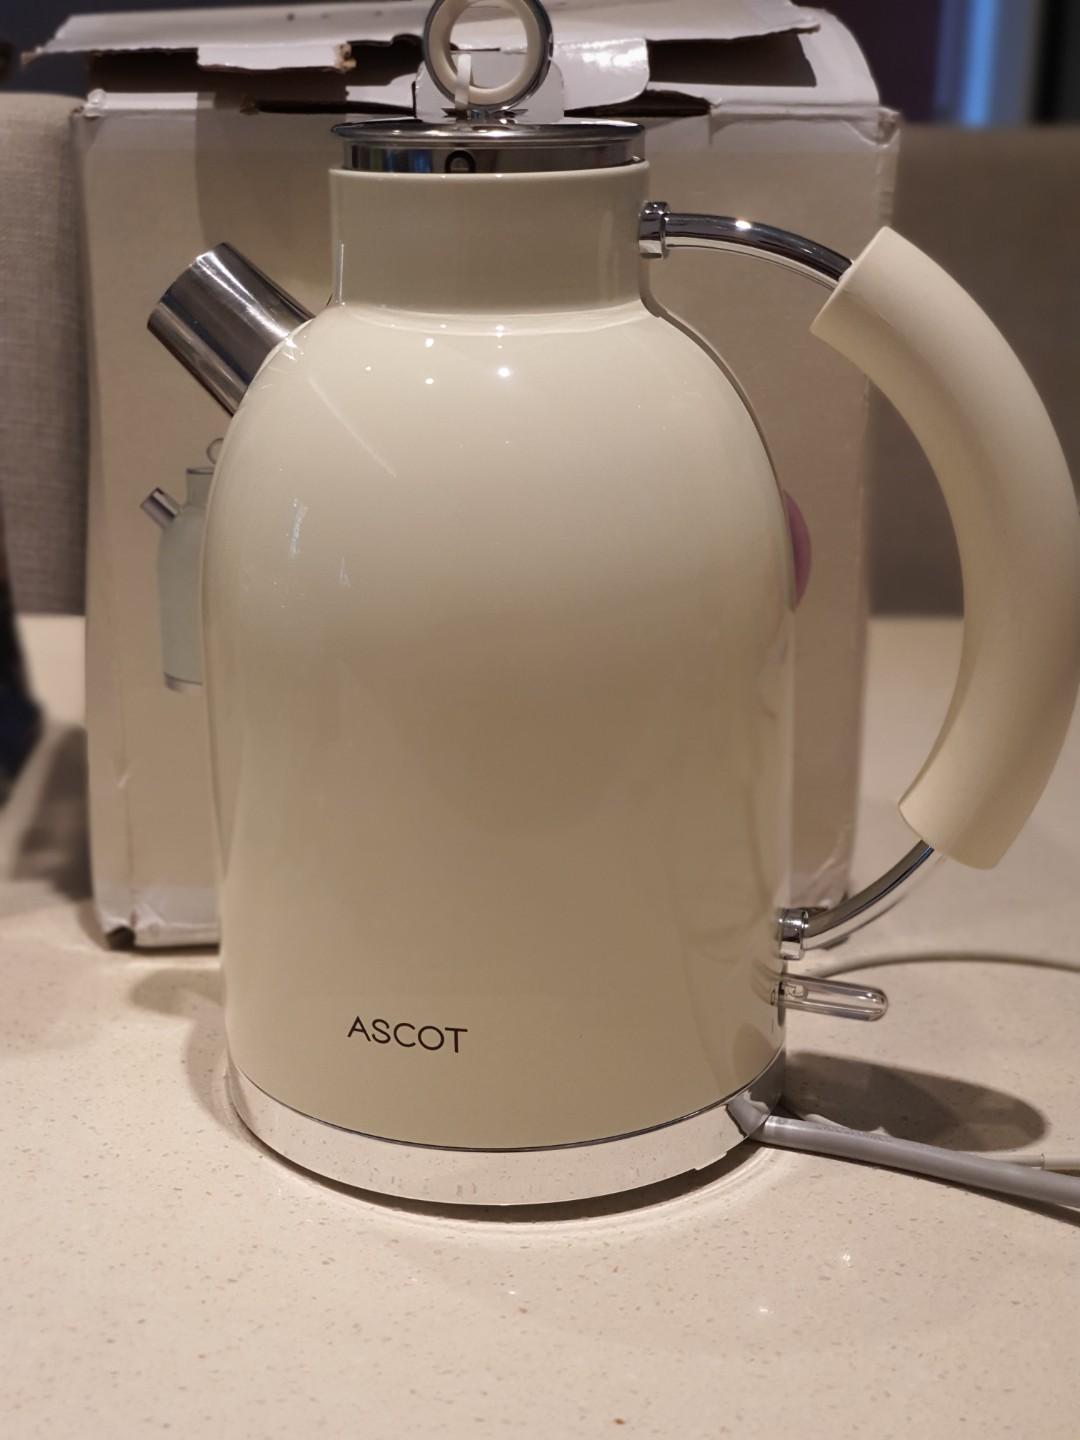 https://media.karousell.com/media/photos/products/2019/09/06/ascot_glass_electric_kettle__quiet_stainless_steel_kettle_fast_boil_3000w_15_l_1567746397_507db3eb_progressive.jpg